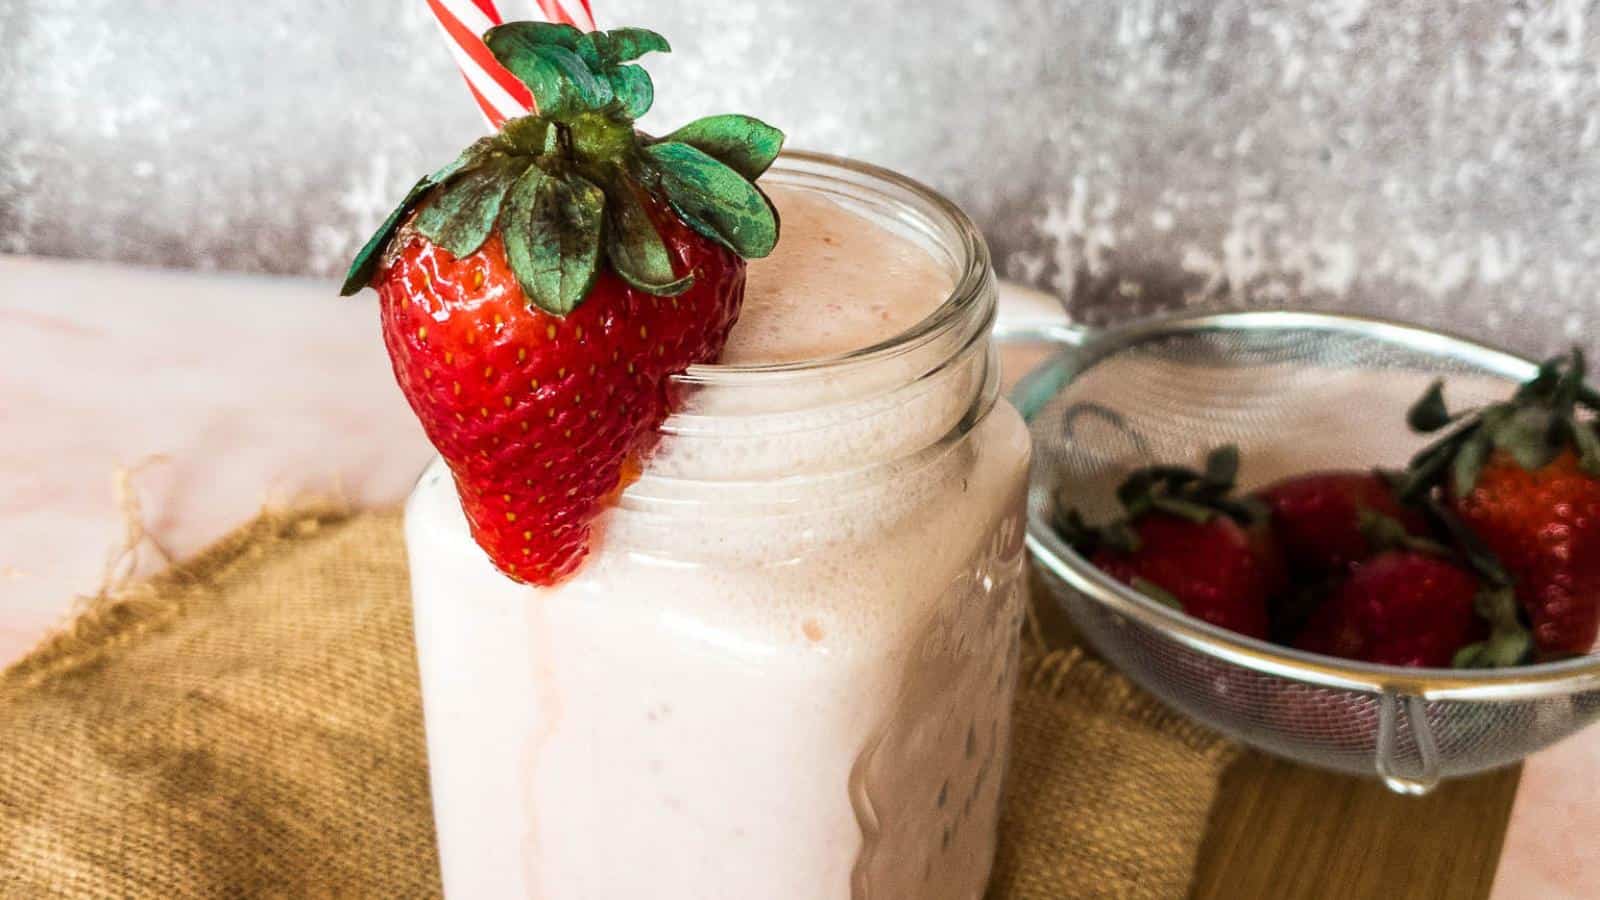 A picture of a strawberry smoothie in glass with fresh strawberry on rim.